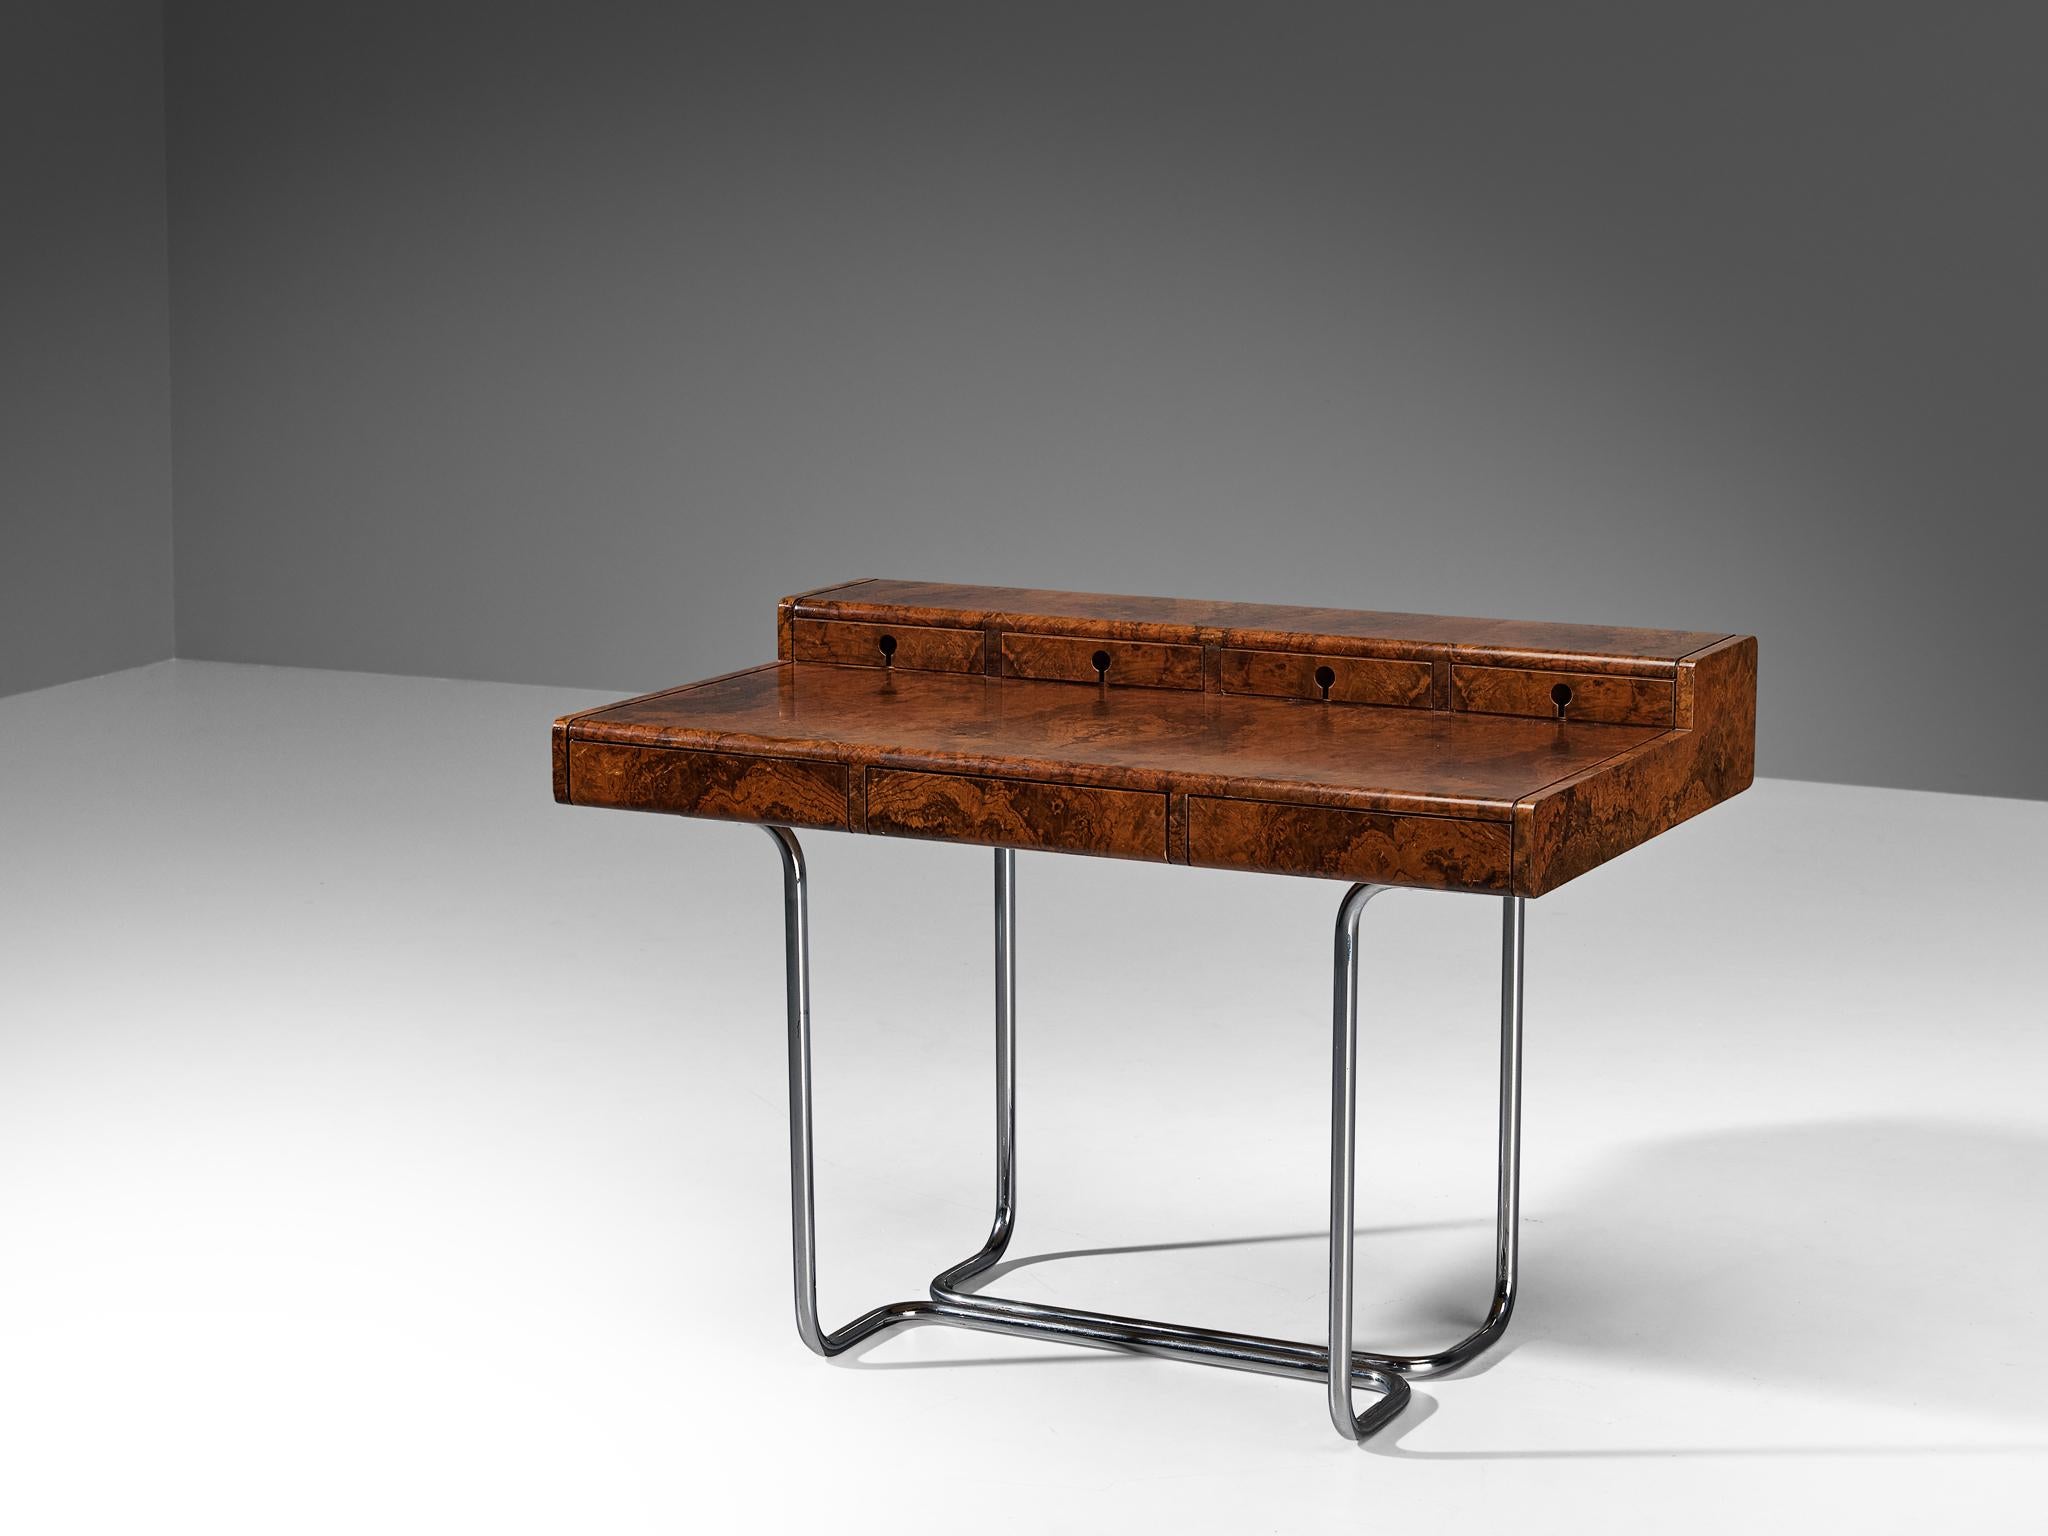 Writing desk, walnut burl, chrome-plated steel, teak, Italy, 1970s.

This Italian table combines the Bauhaus aesthetics with Italian midcentury style. The tabletop appears dense and compact, while the base is designed with an open look, consisting